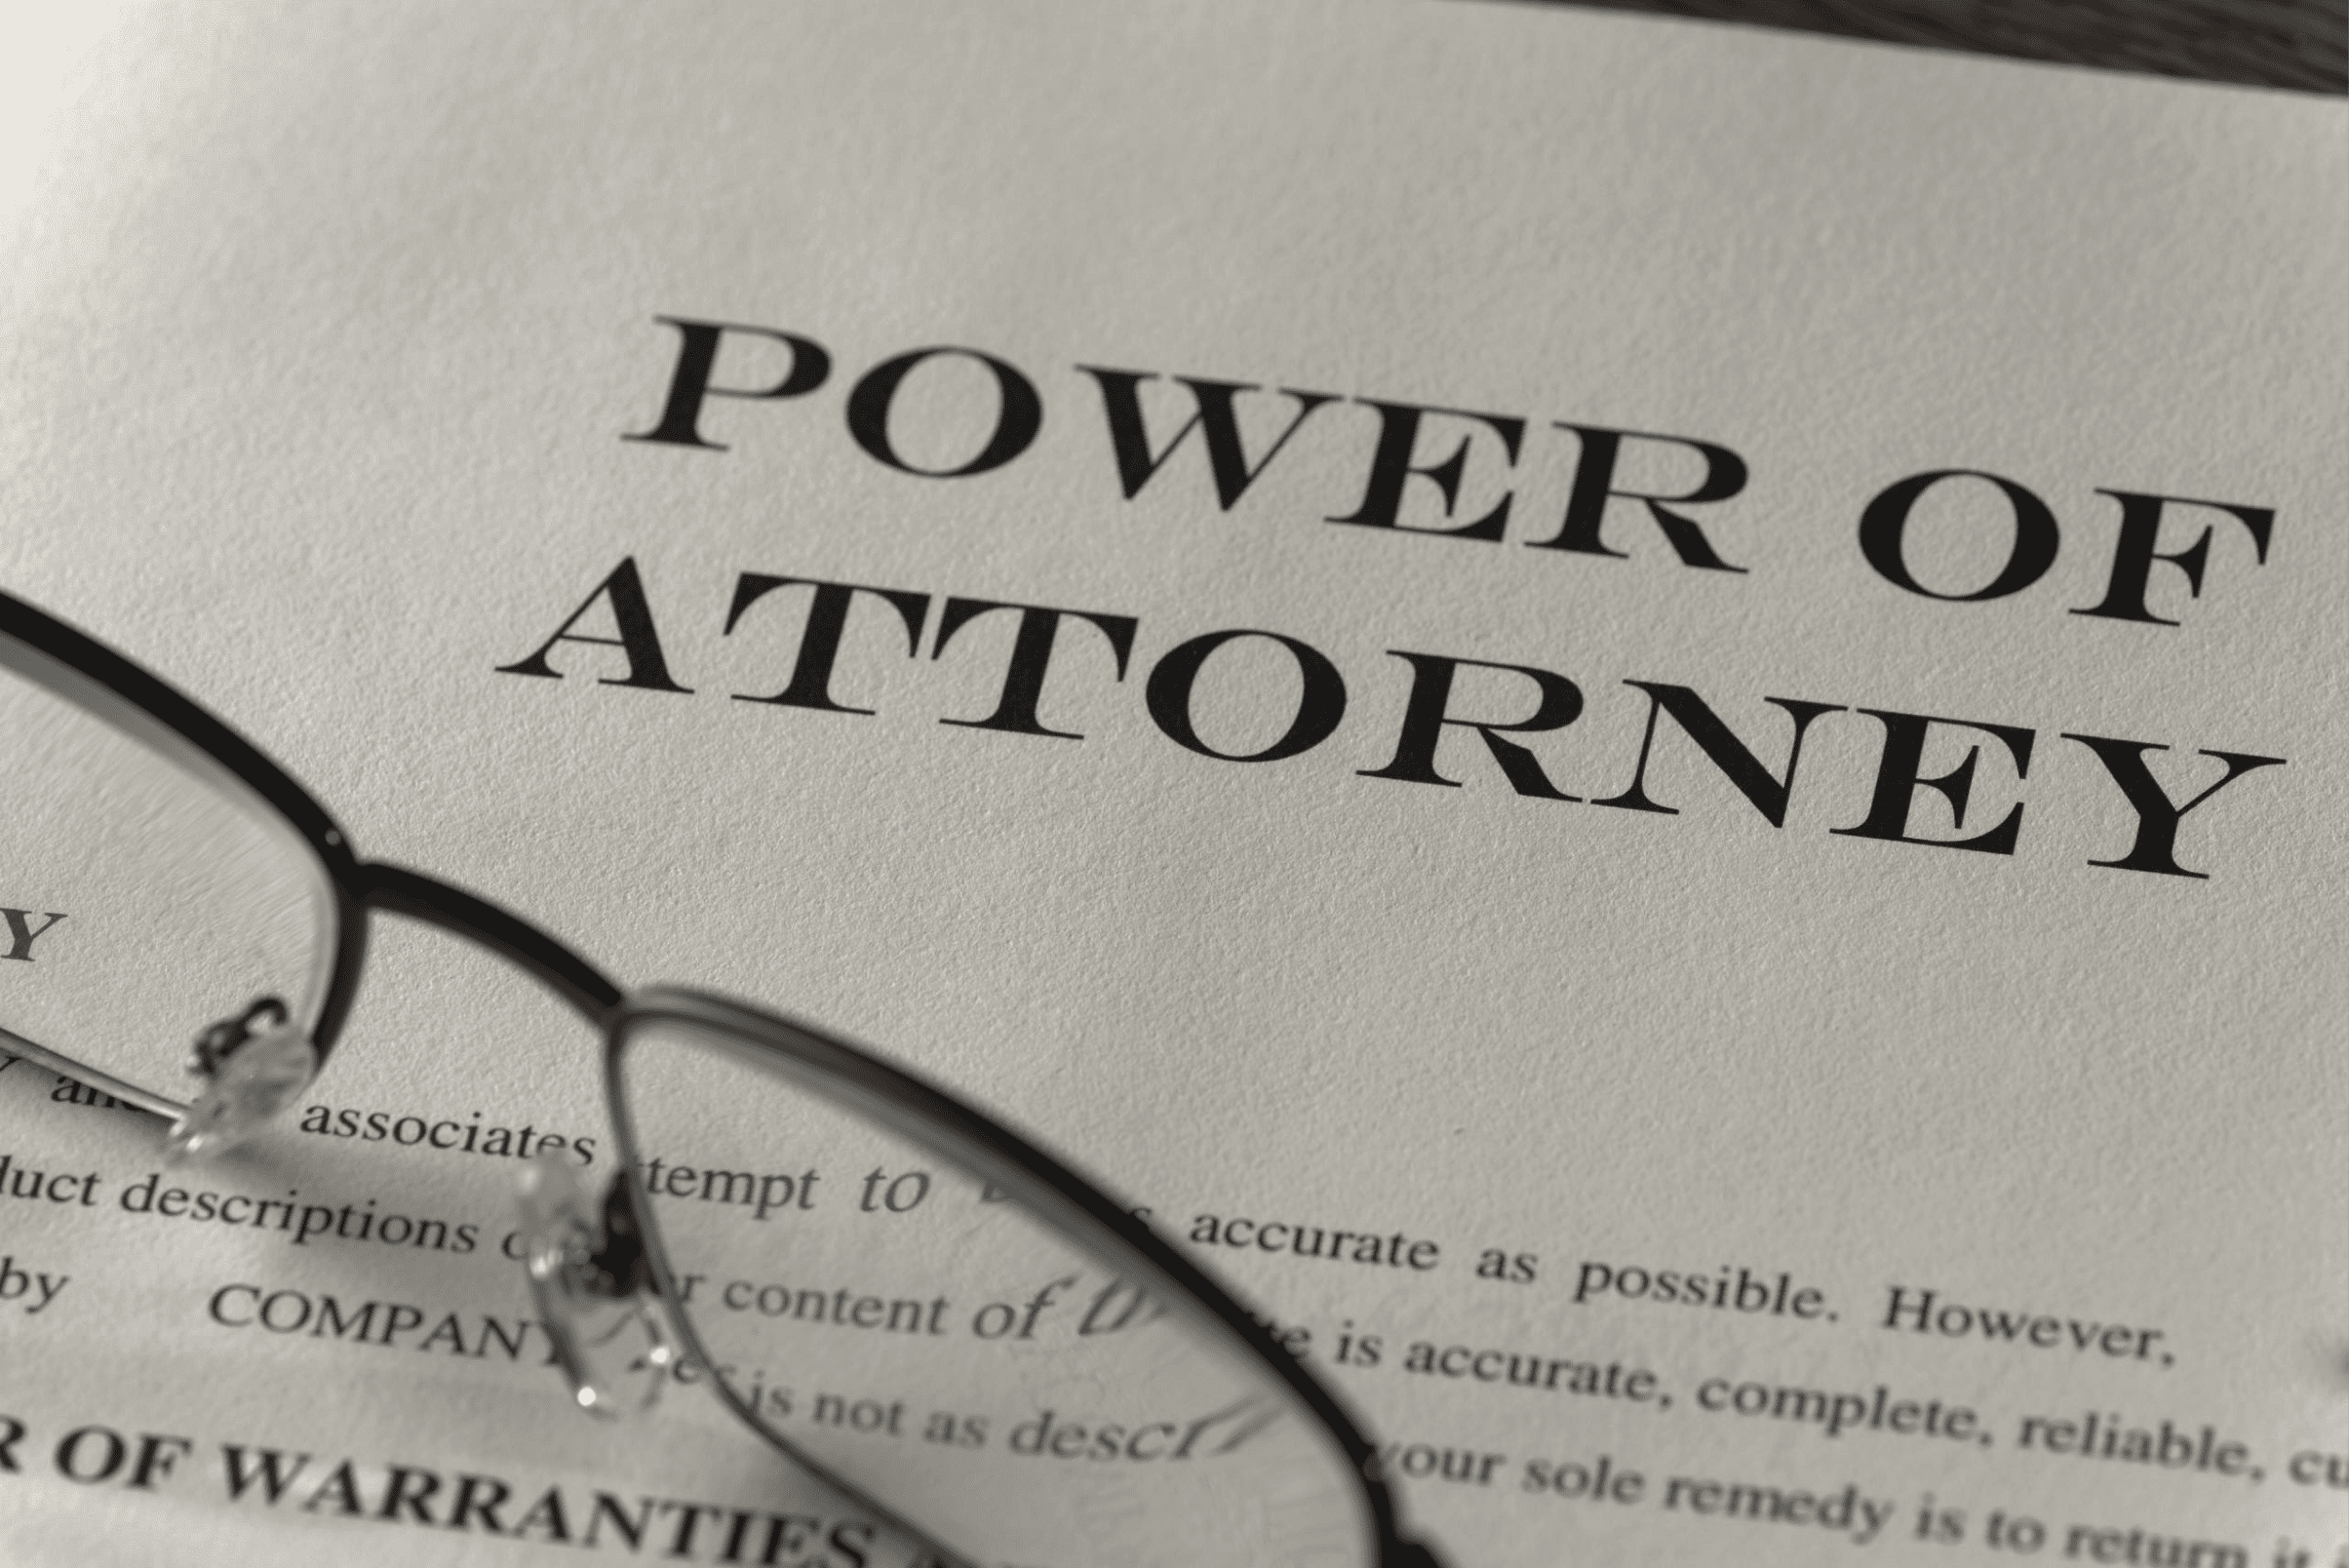 https://crumbleylaw.com/wp-content/uploads/2023/02/Power-Attorney.png